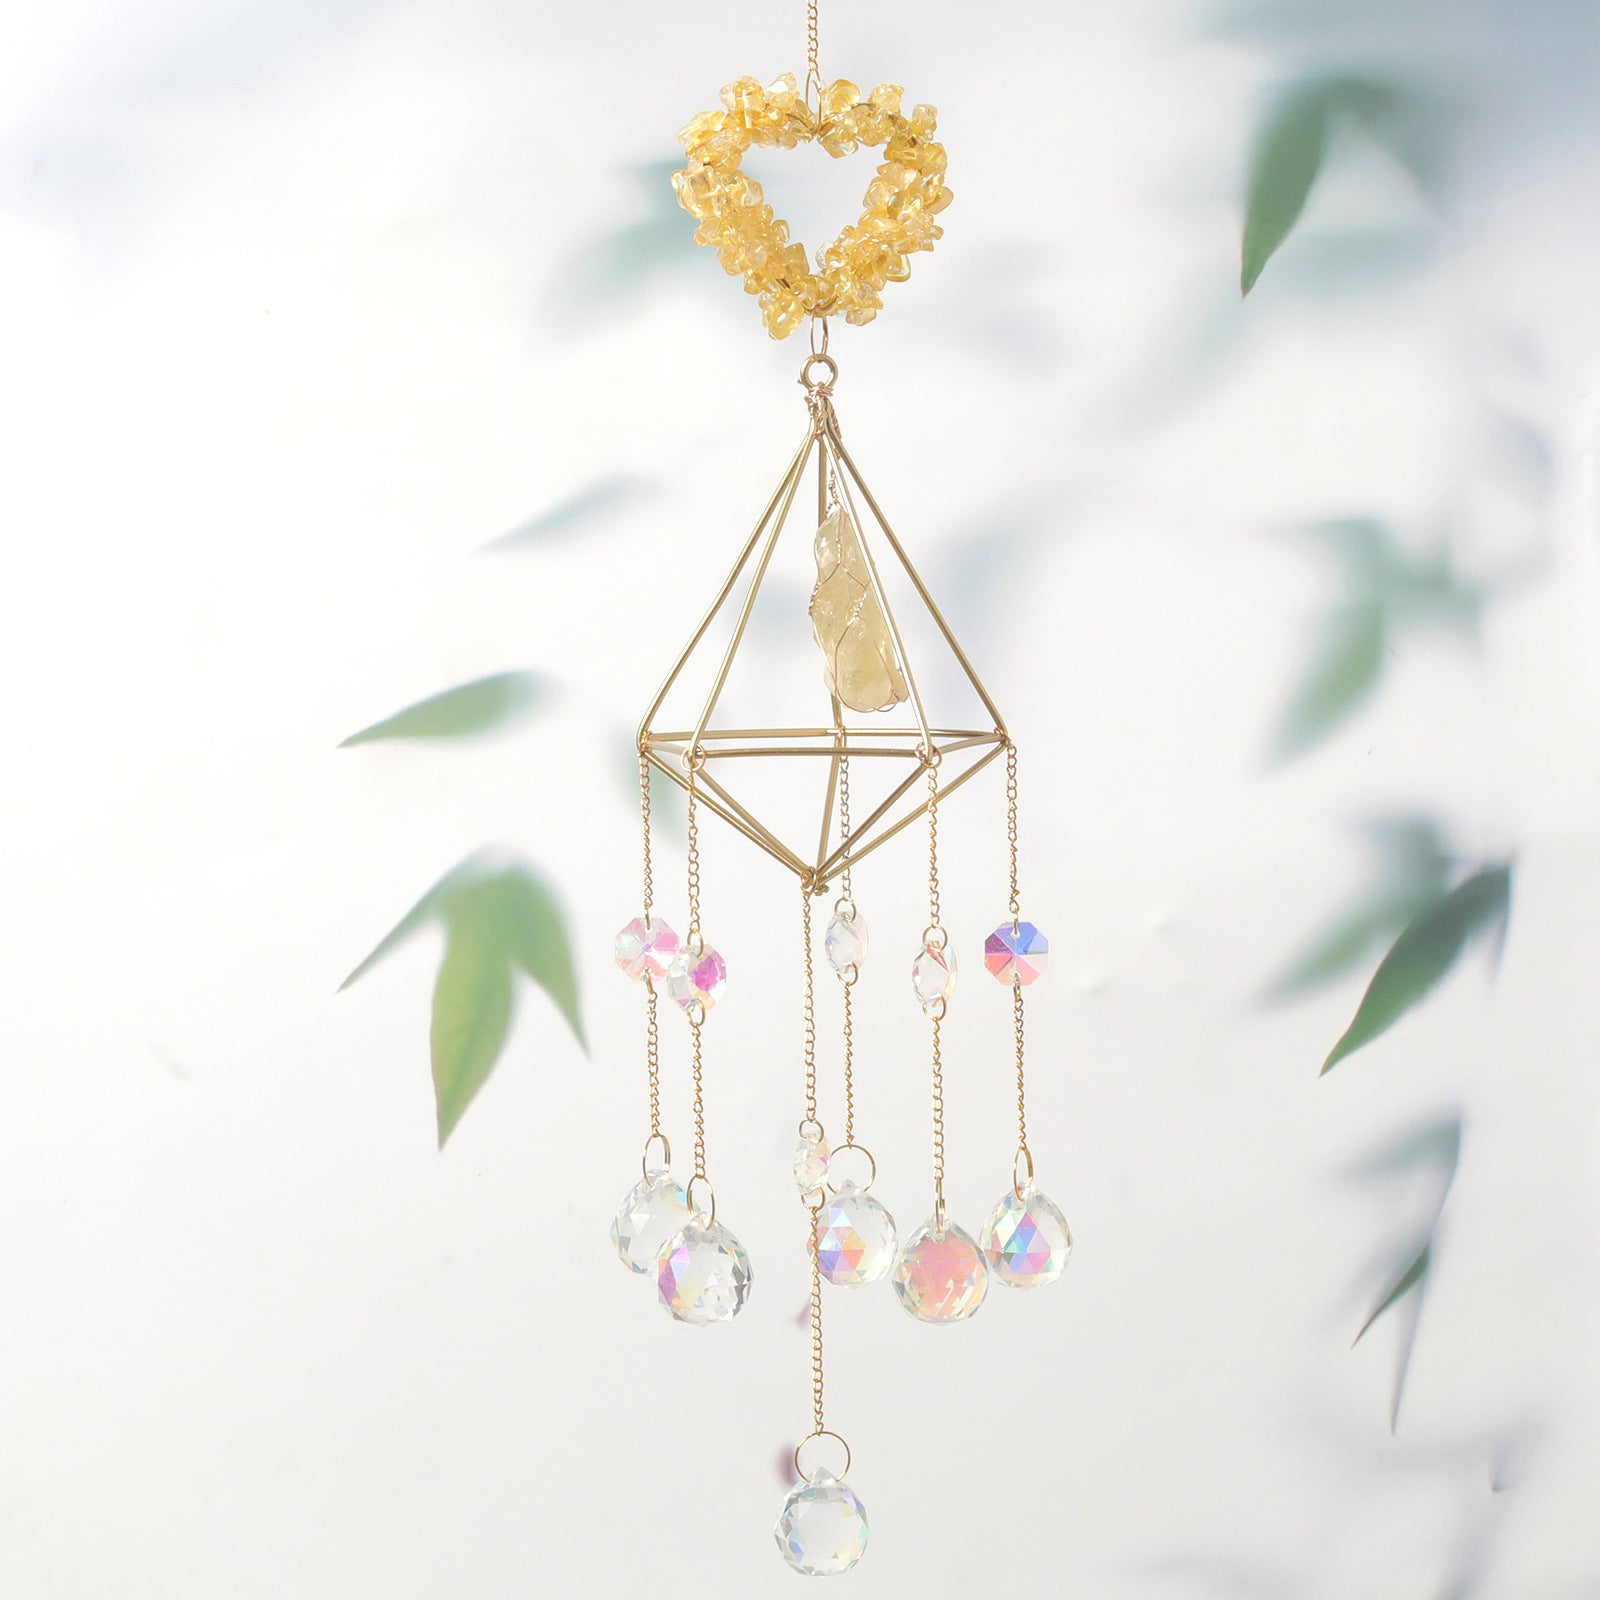 Colorful Crystal Suncatcher Hanging For Indoor Outdoor Decor